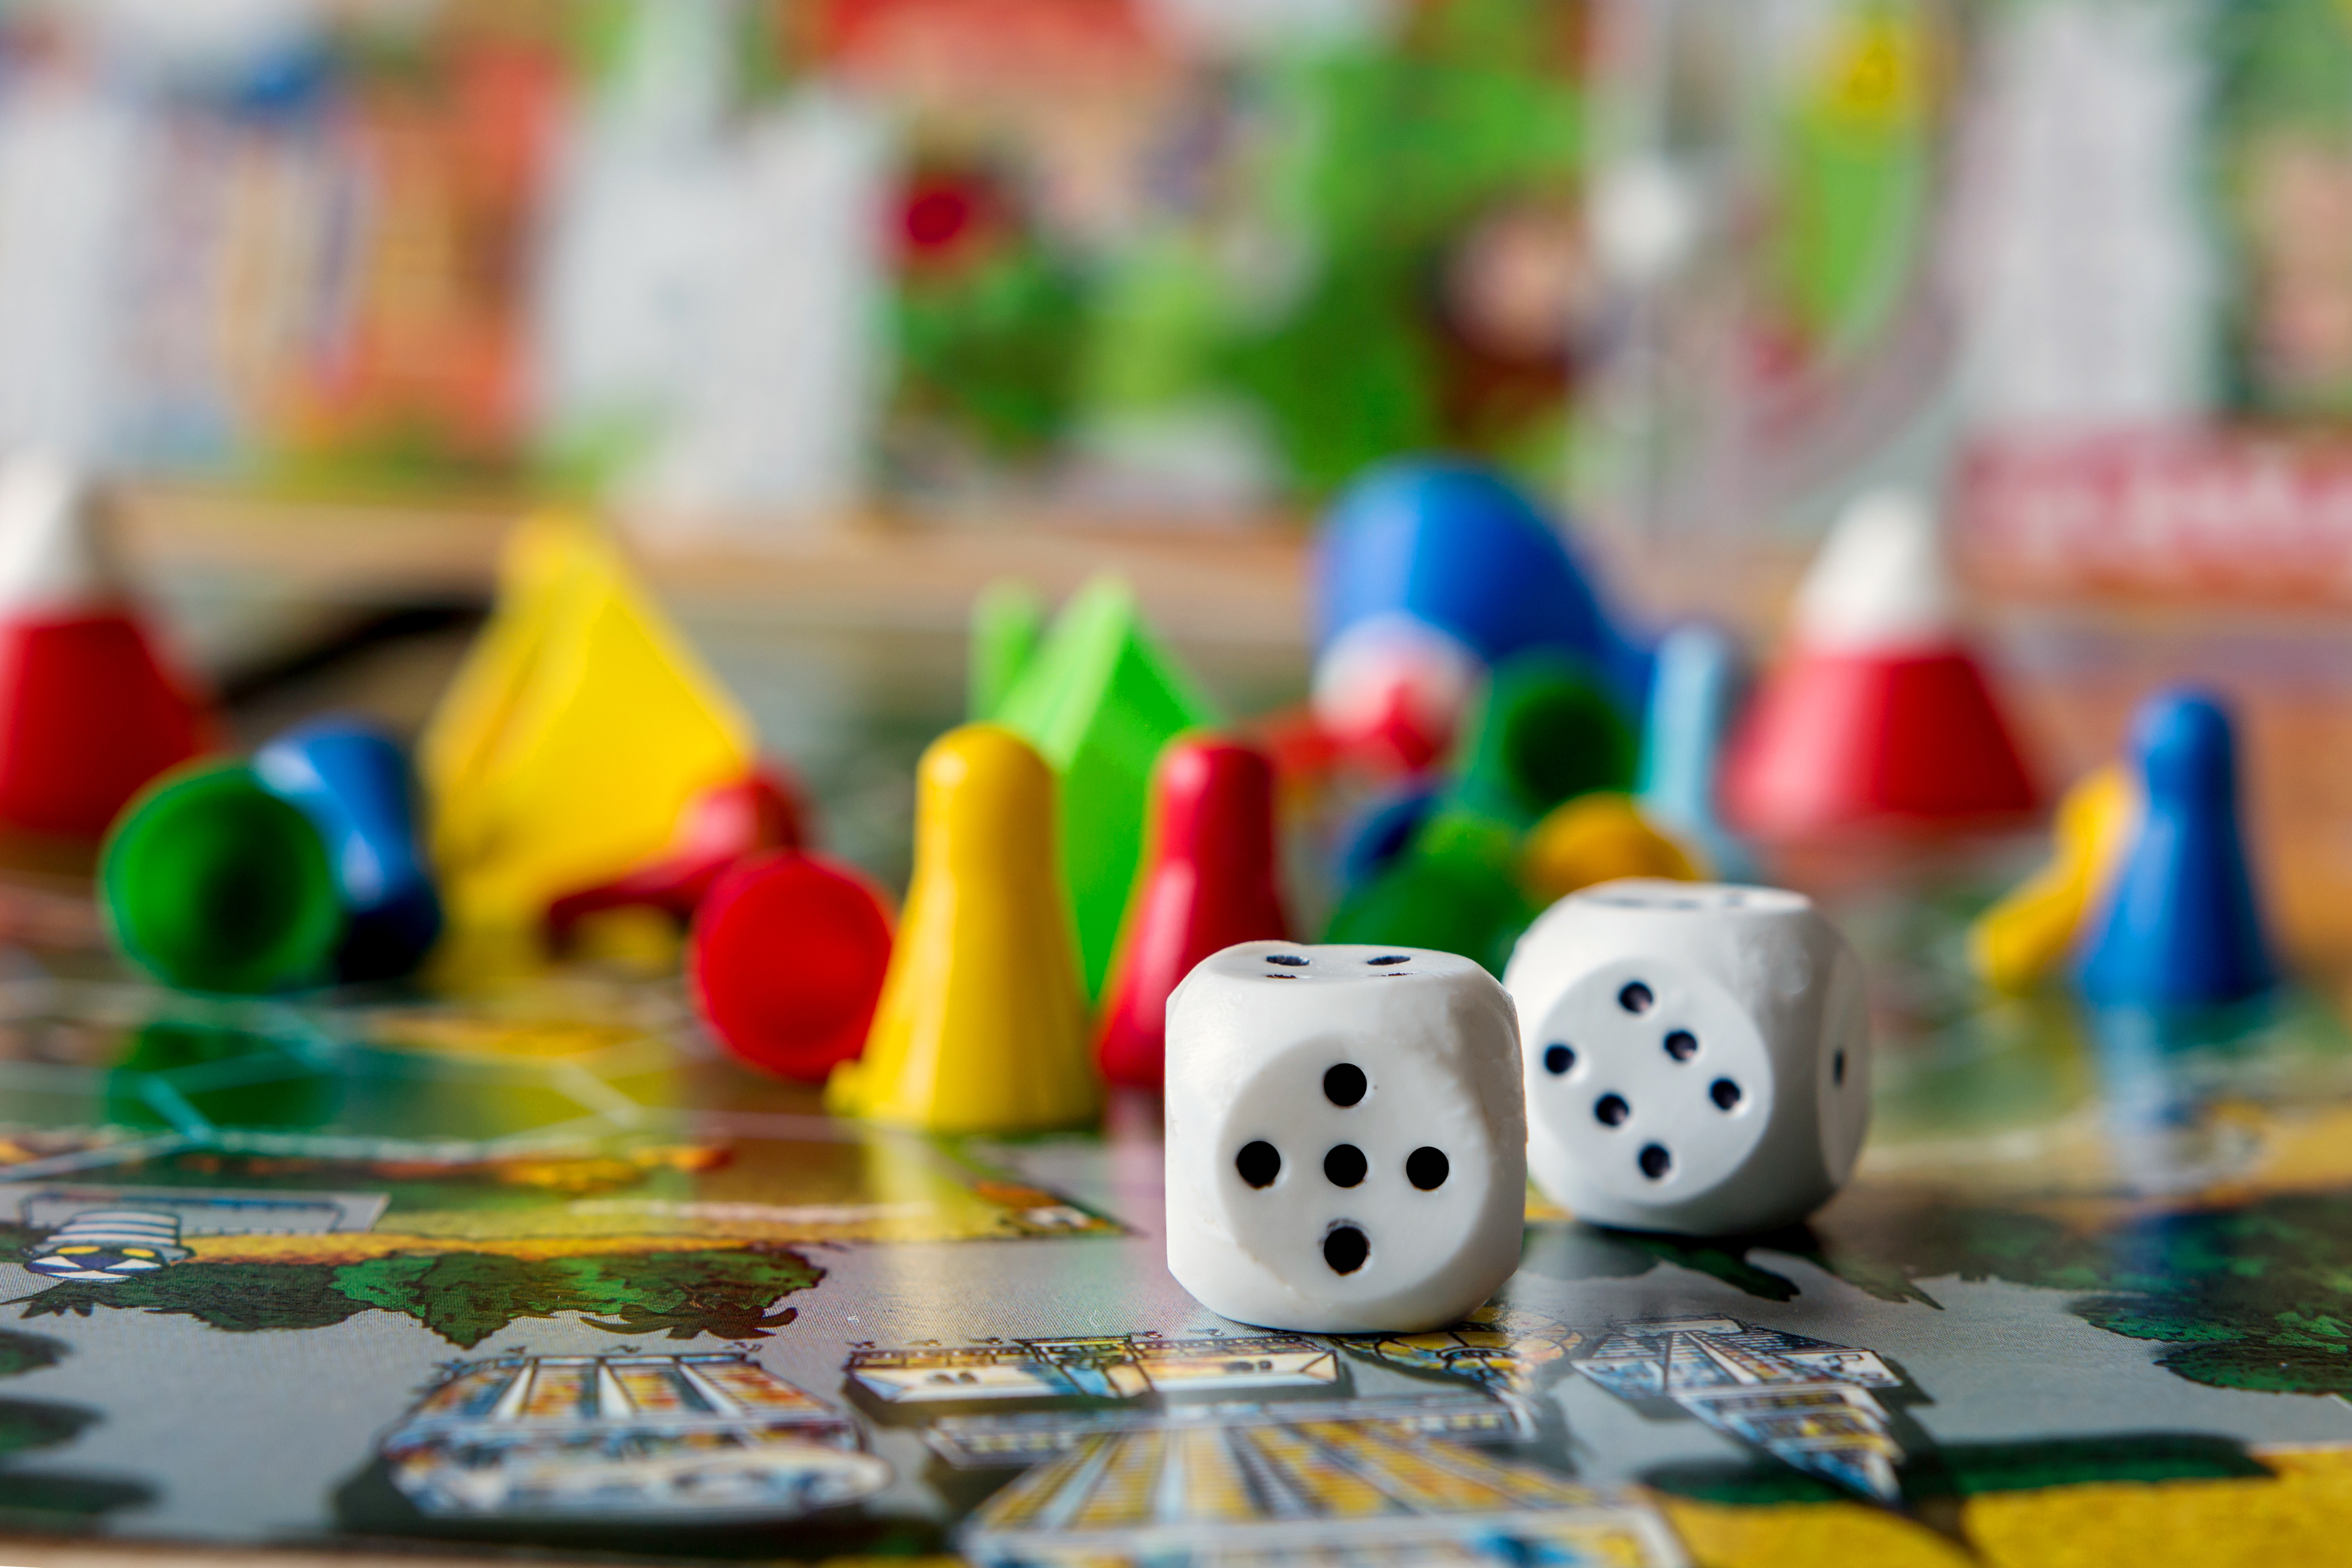 Starting in November, Livingston Parish Library patrons will be able to check out board games